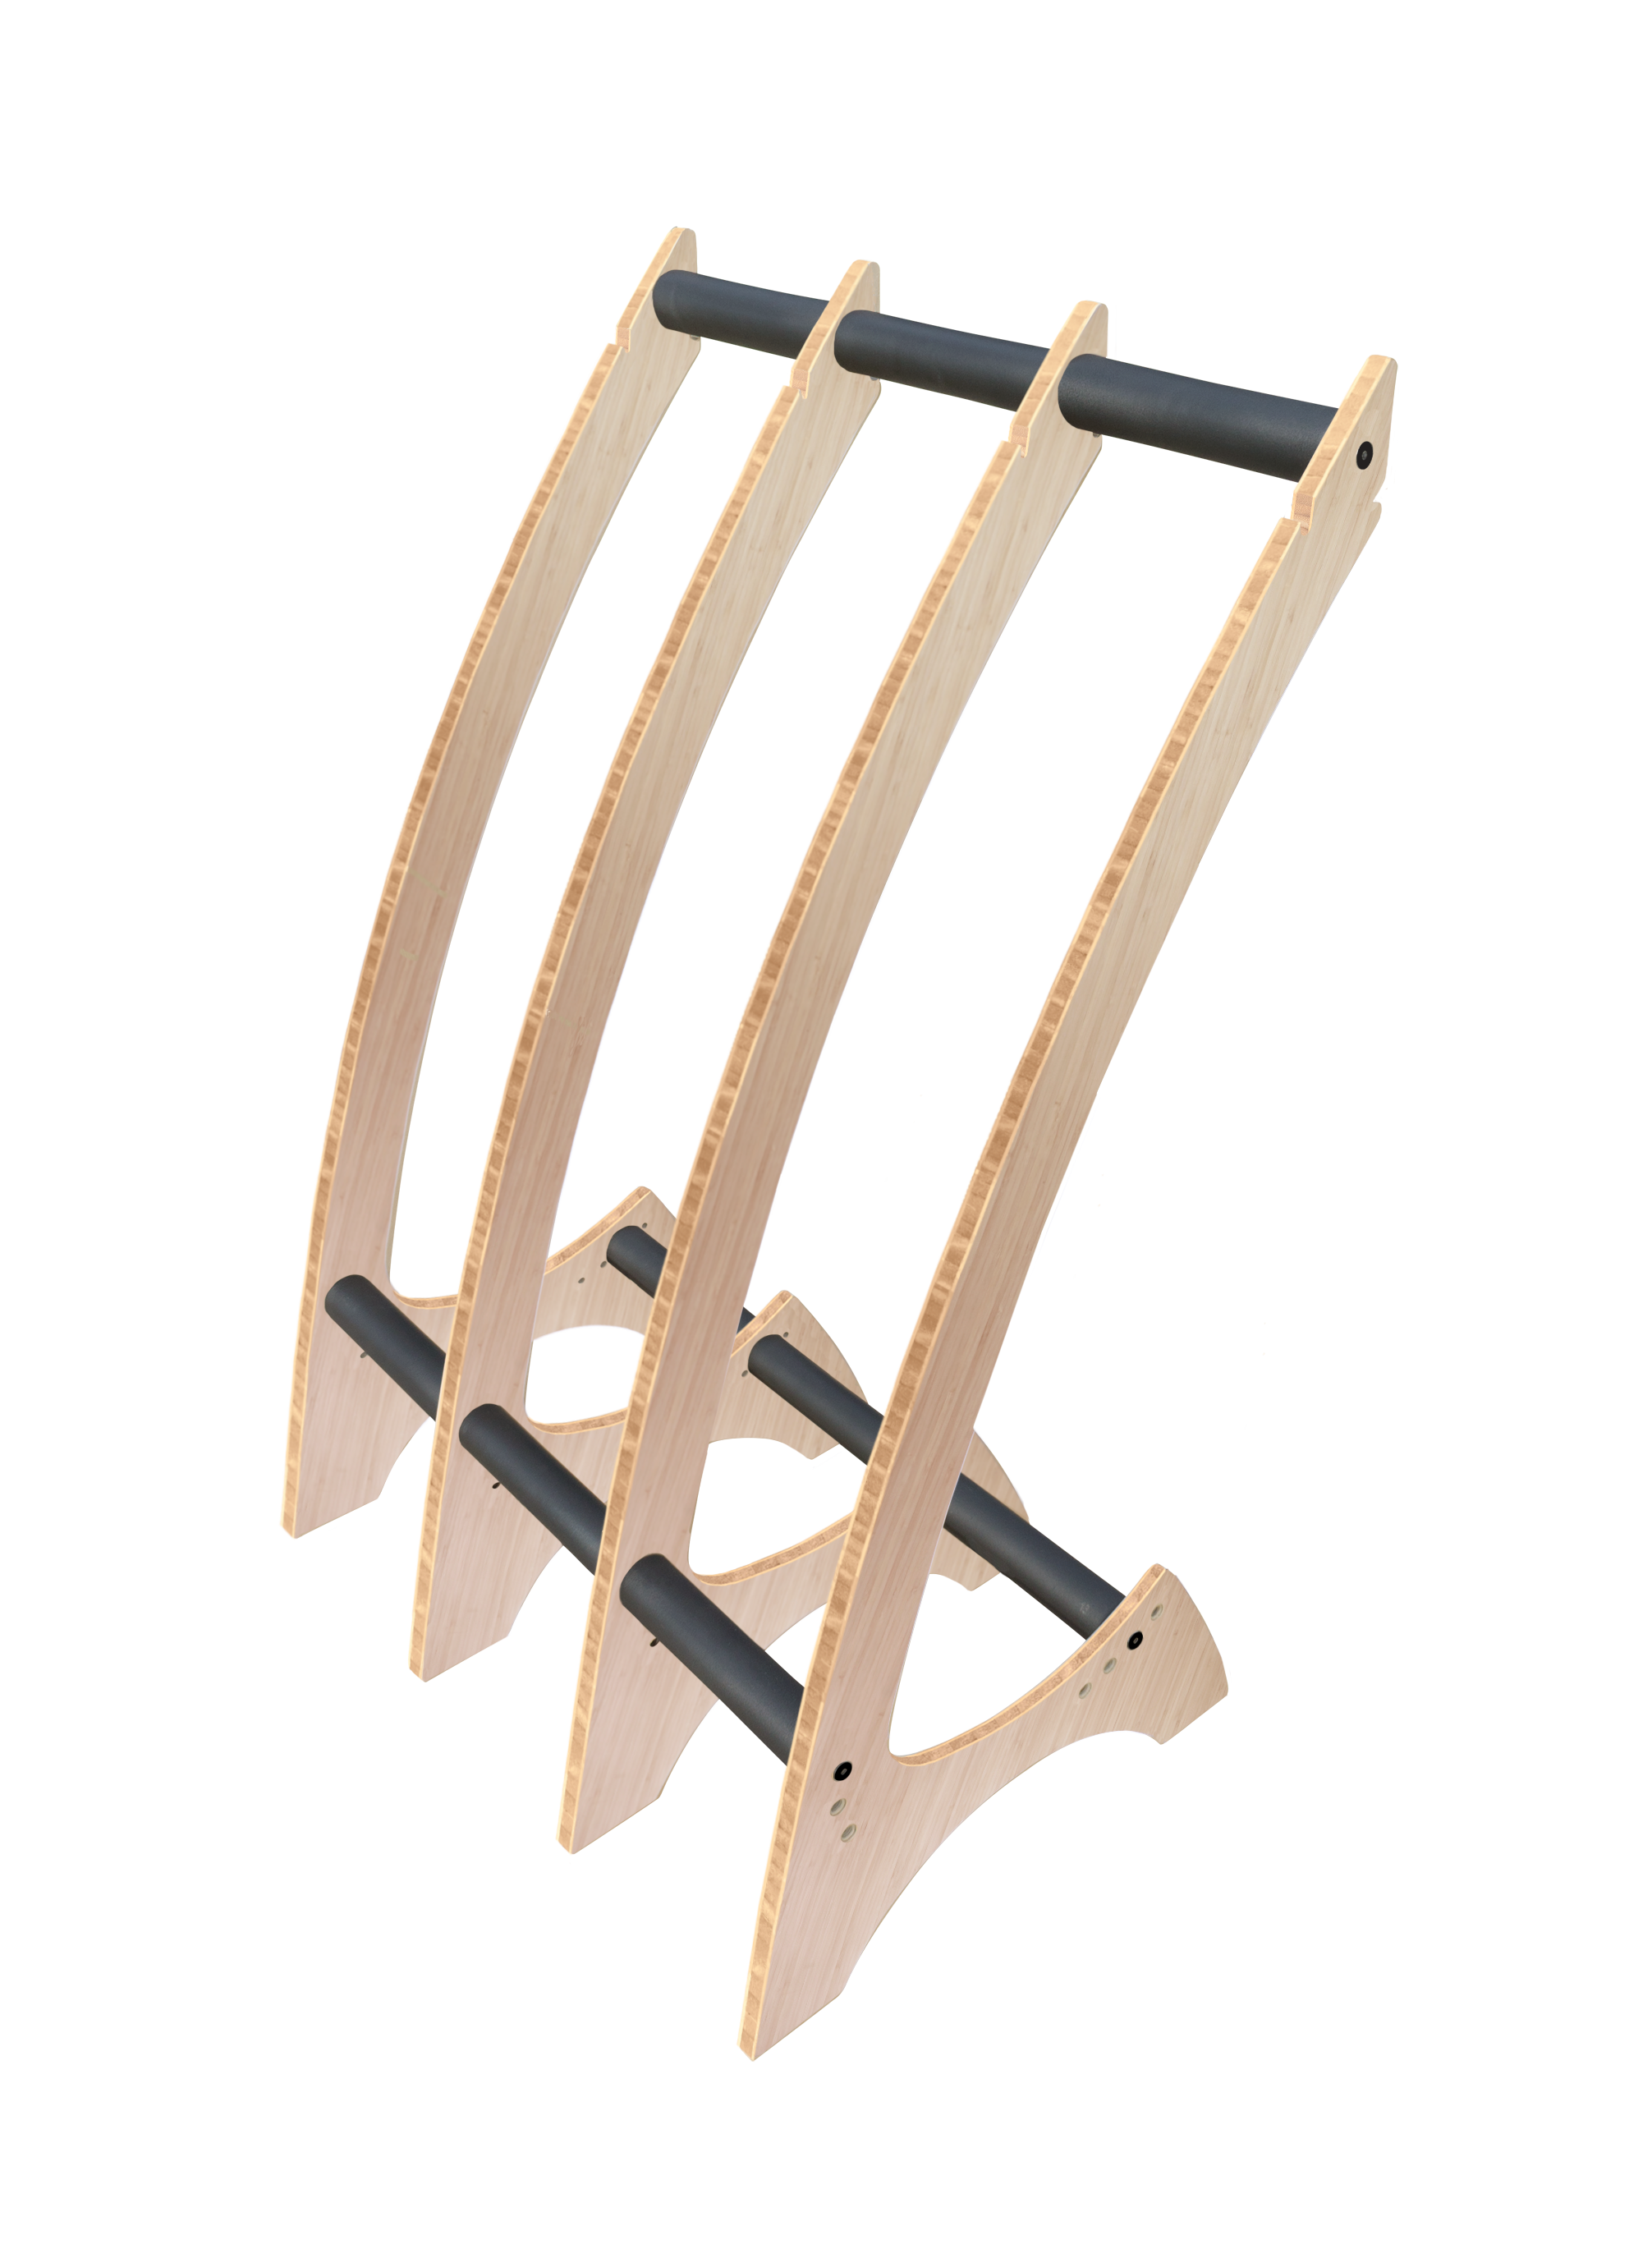 Thruster (3 - 9 Boards)